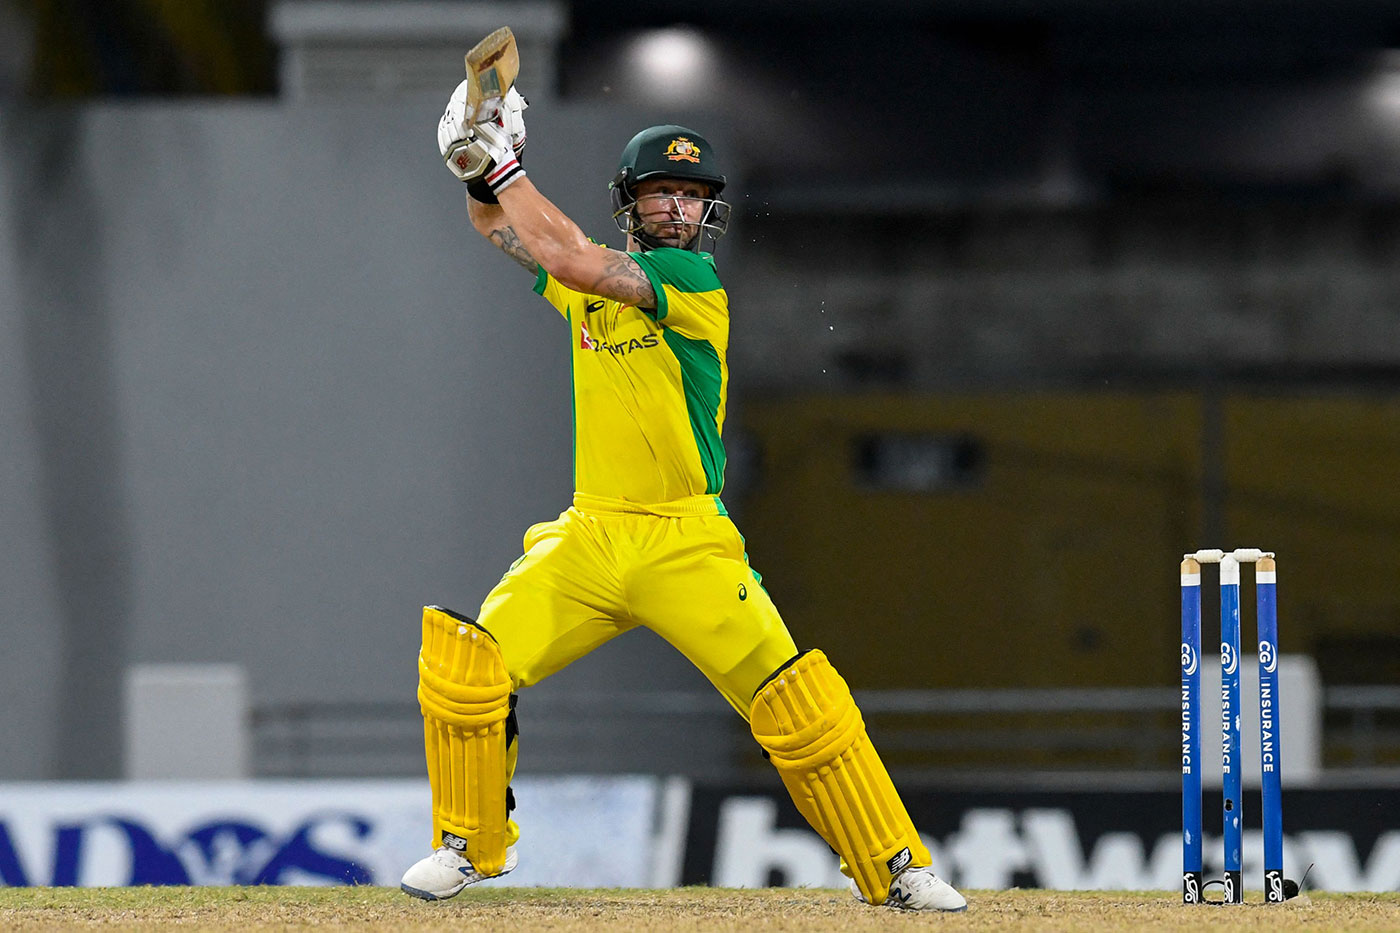 T20 World Cup 2021 | Preparing to nail down a middle-to-lower order role, says Matthew Wade